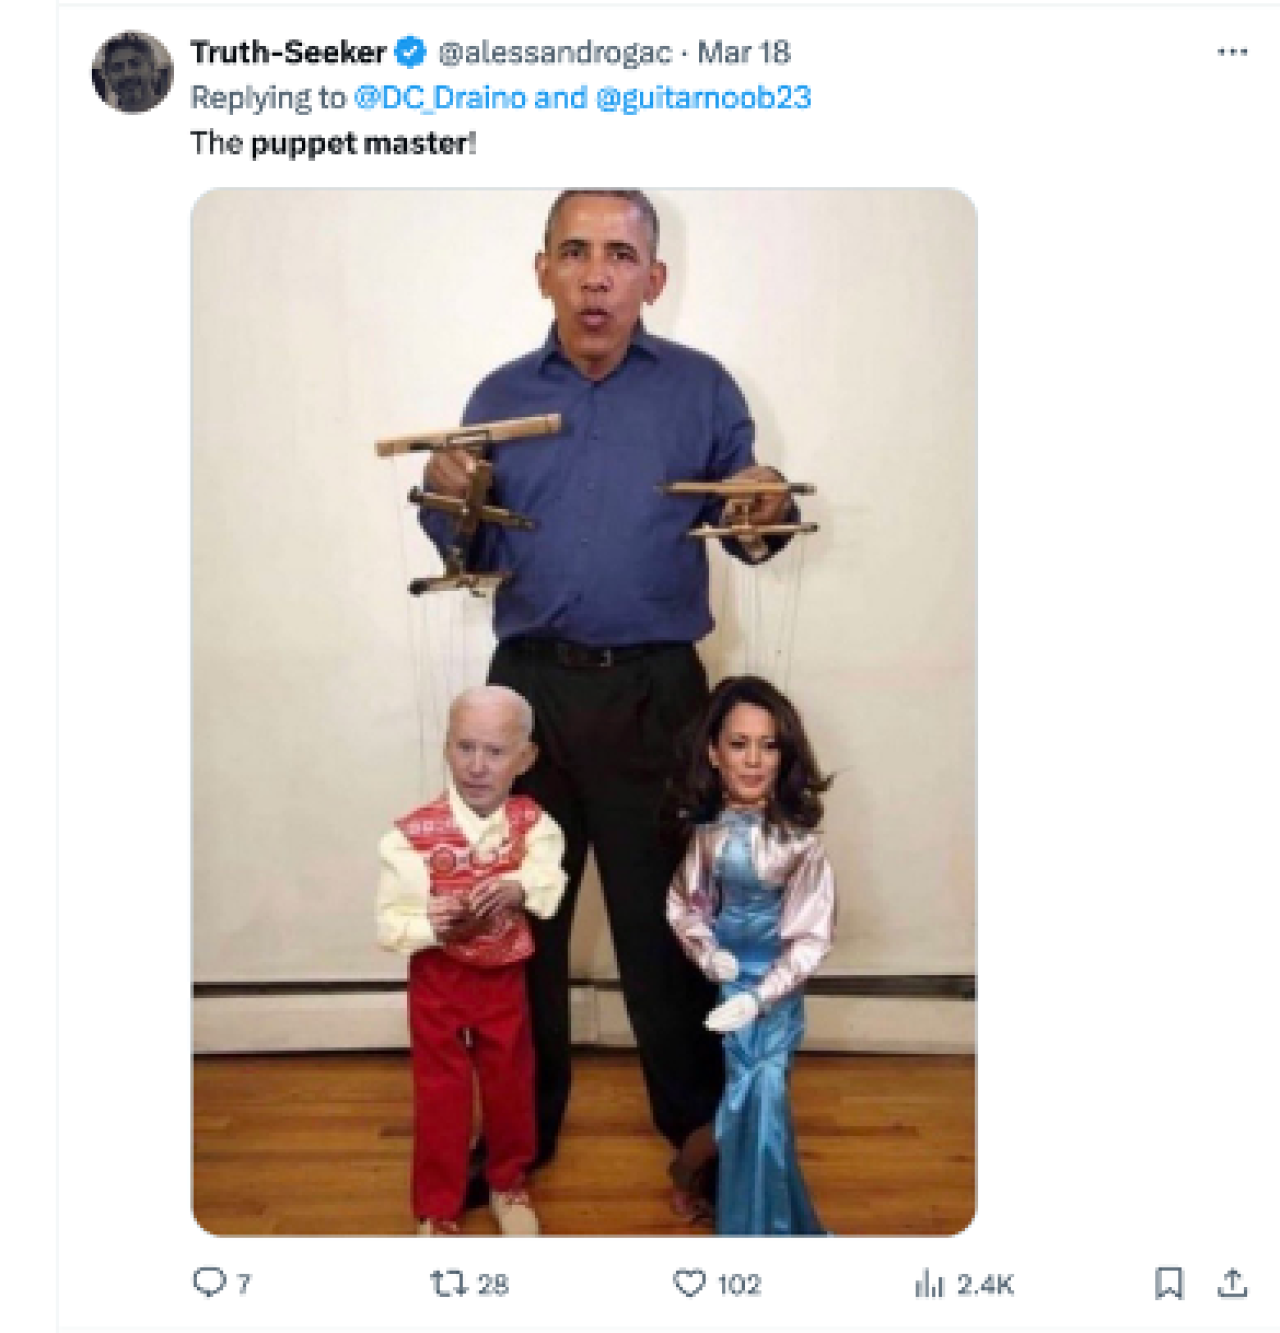 Post that shows photoshopped Obama as puppet master of Biden and Harris.